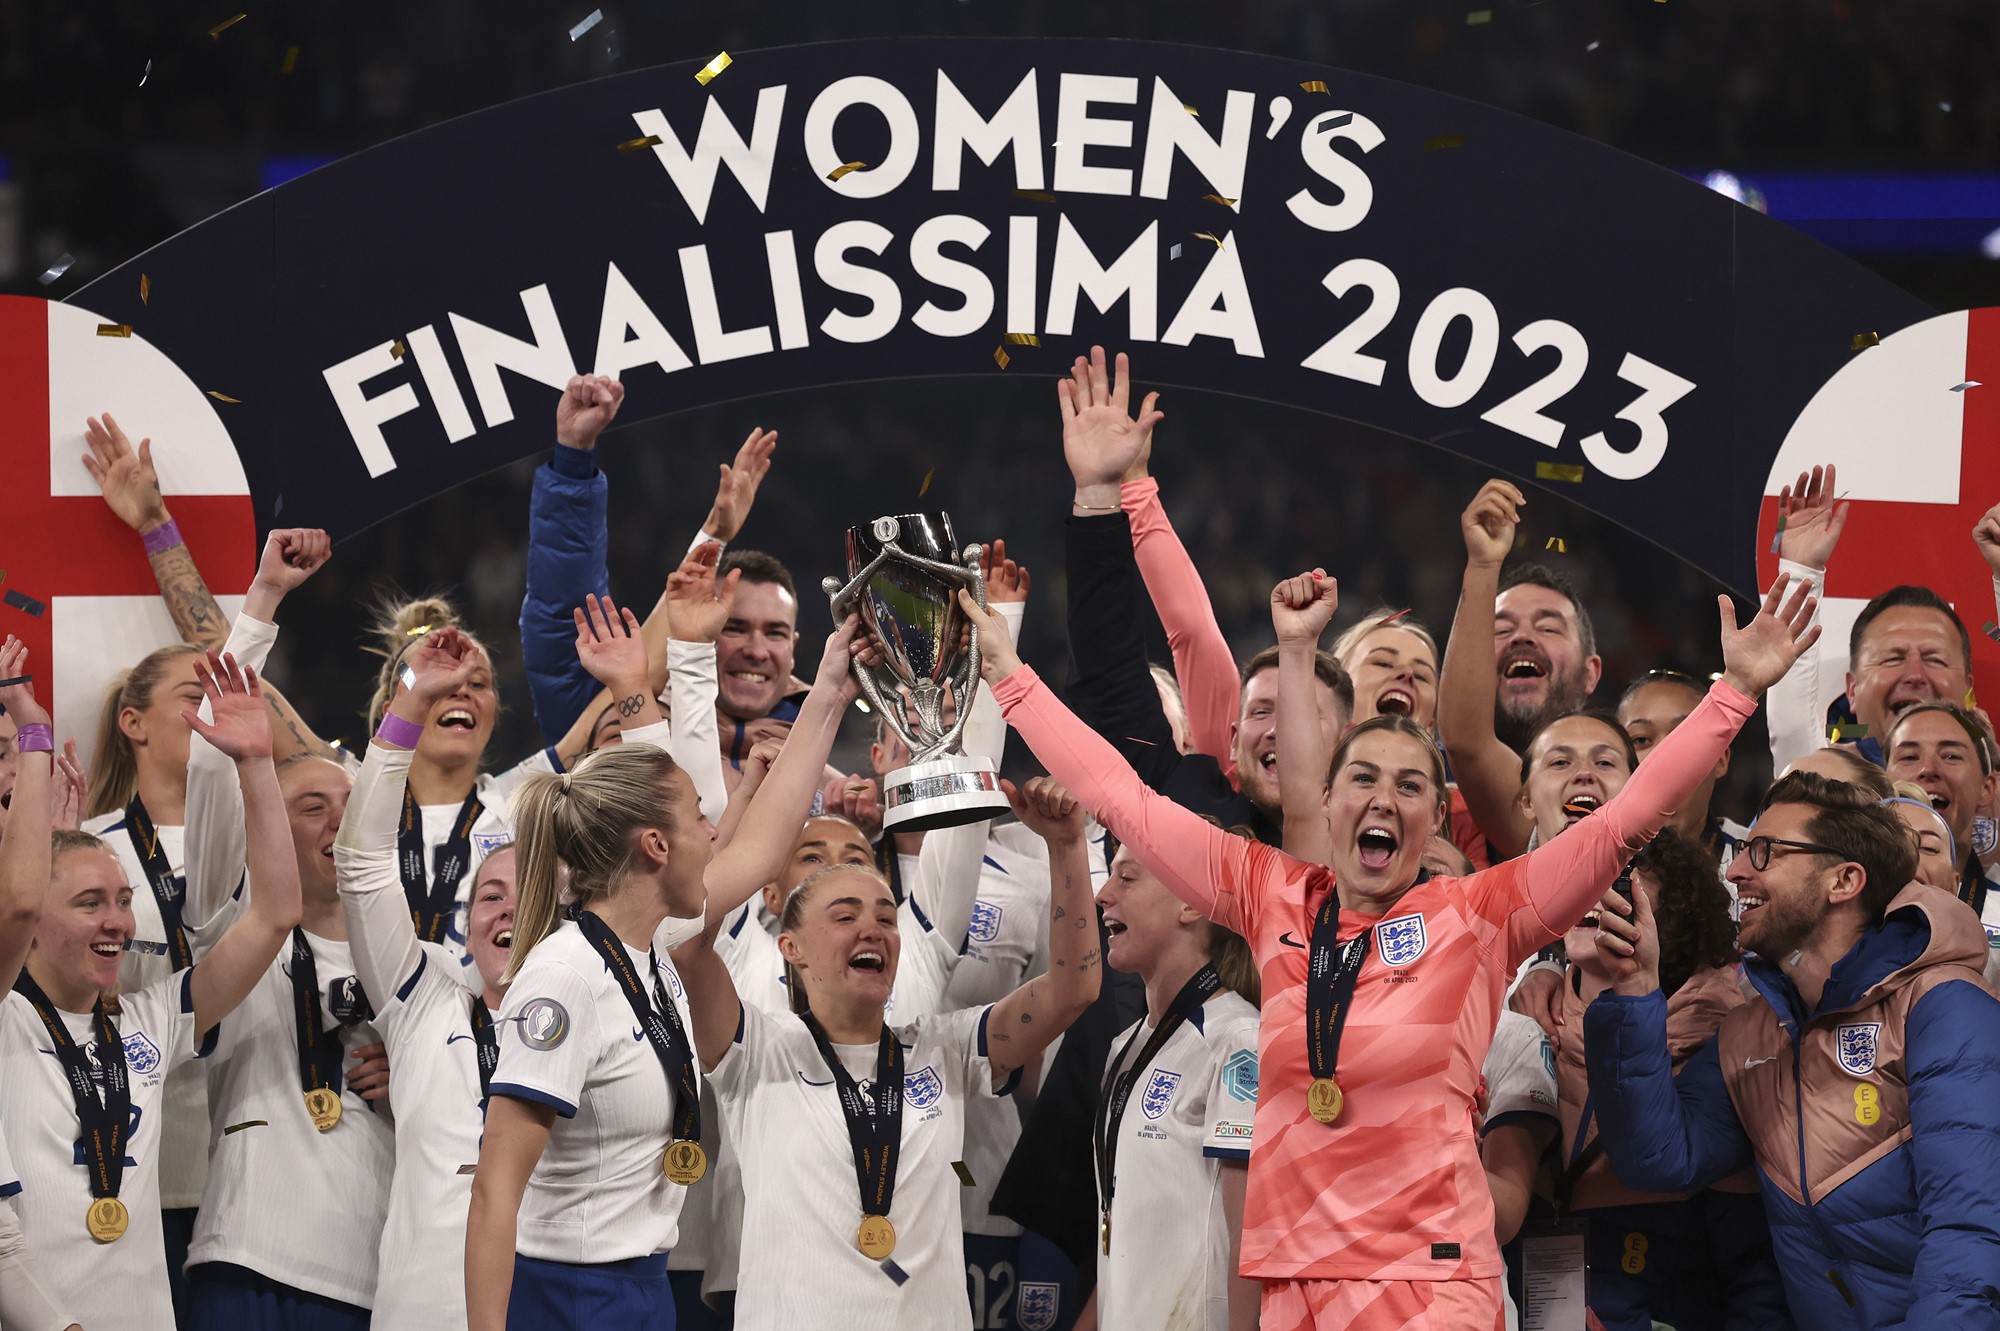 The England women's team chears holding a trophy under teh Women's Finalissima 2023 banner. 